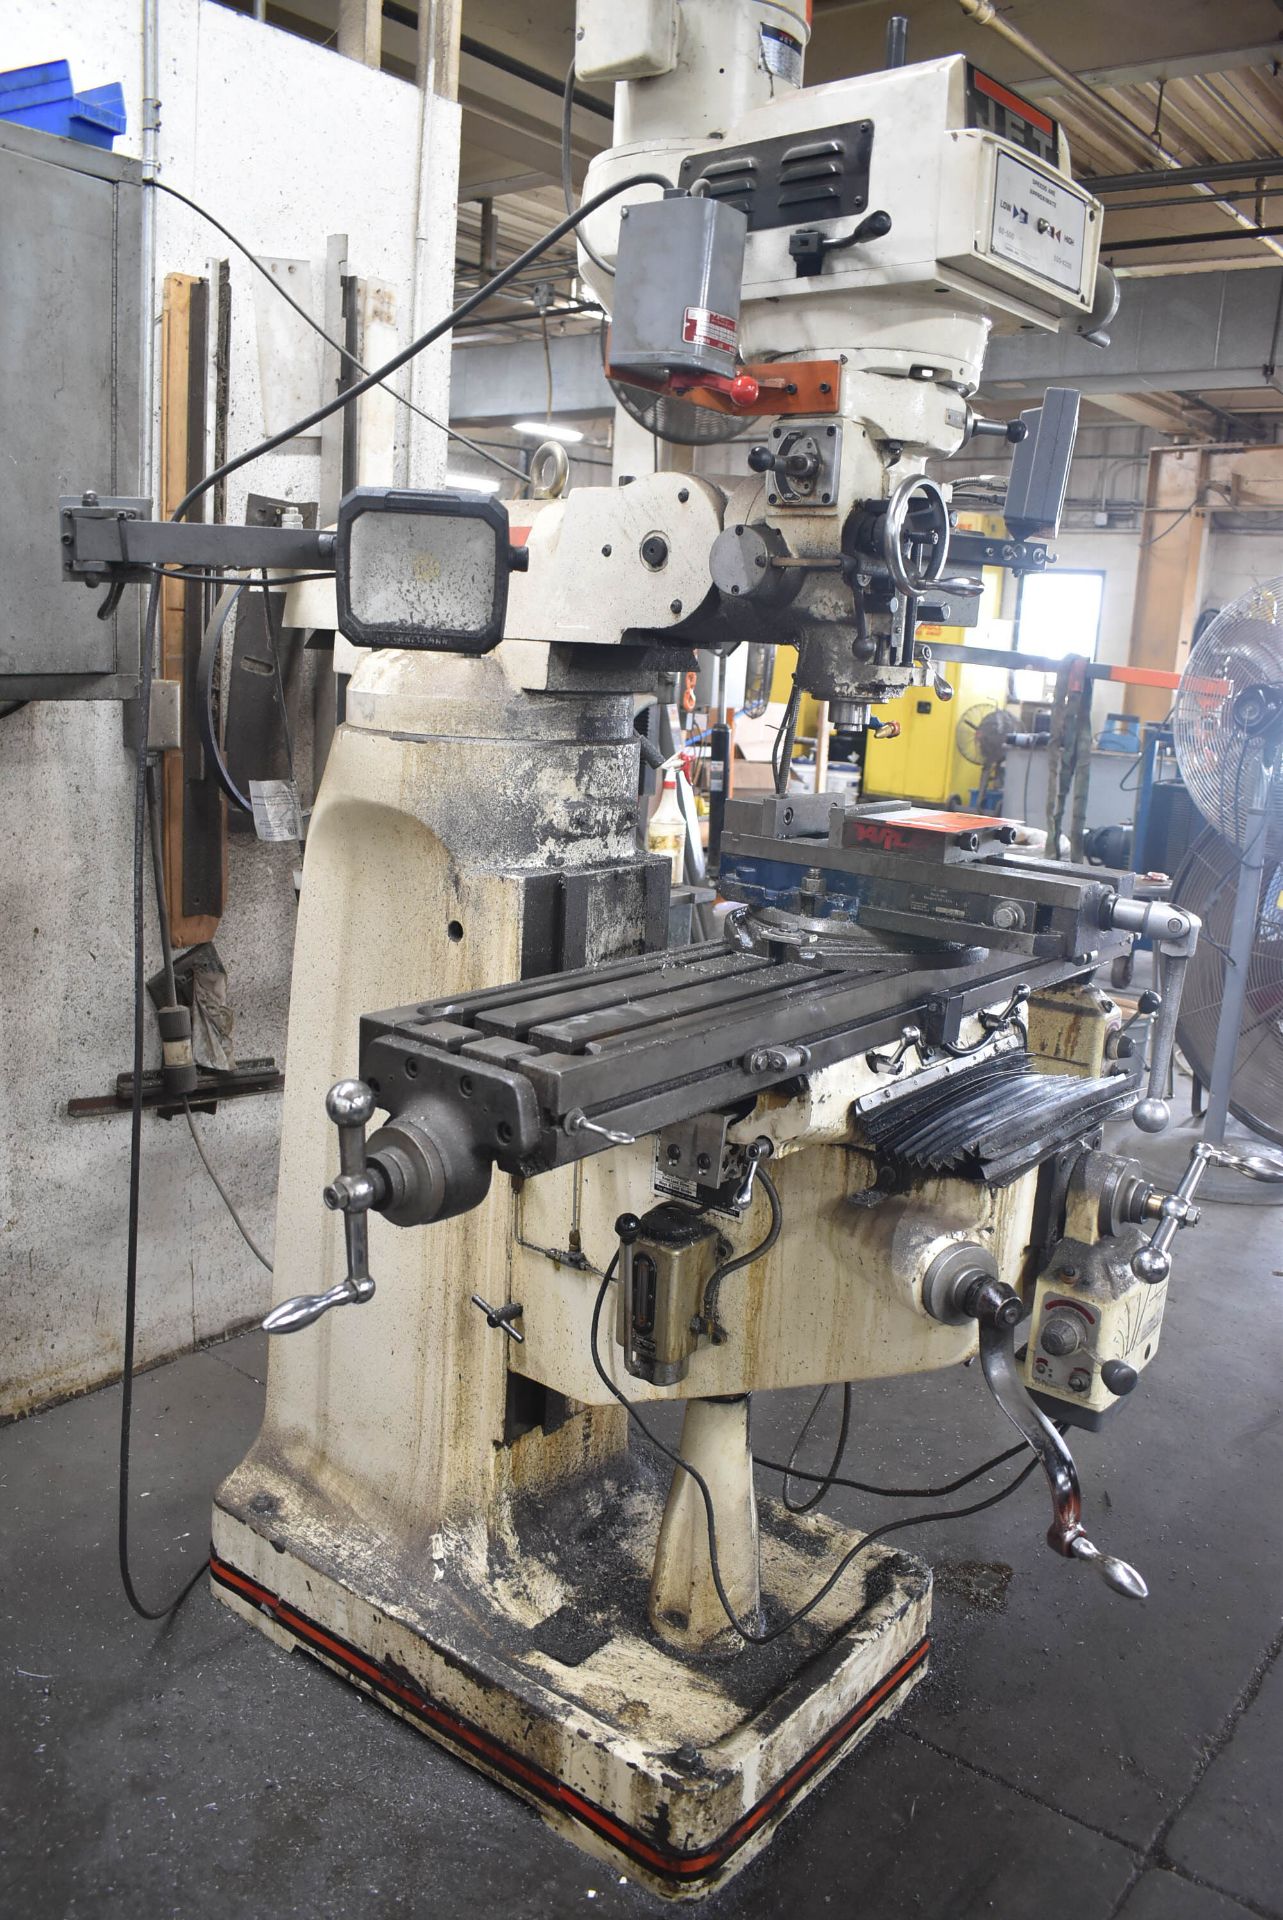 JET JTM-4VS VERTICAL MILLING MACHINE WITH 9"X48" TABLE, INFINITELY VARIABLE SPEEDS TO 4200 RPM, - Image 4 of 7